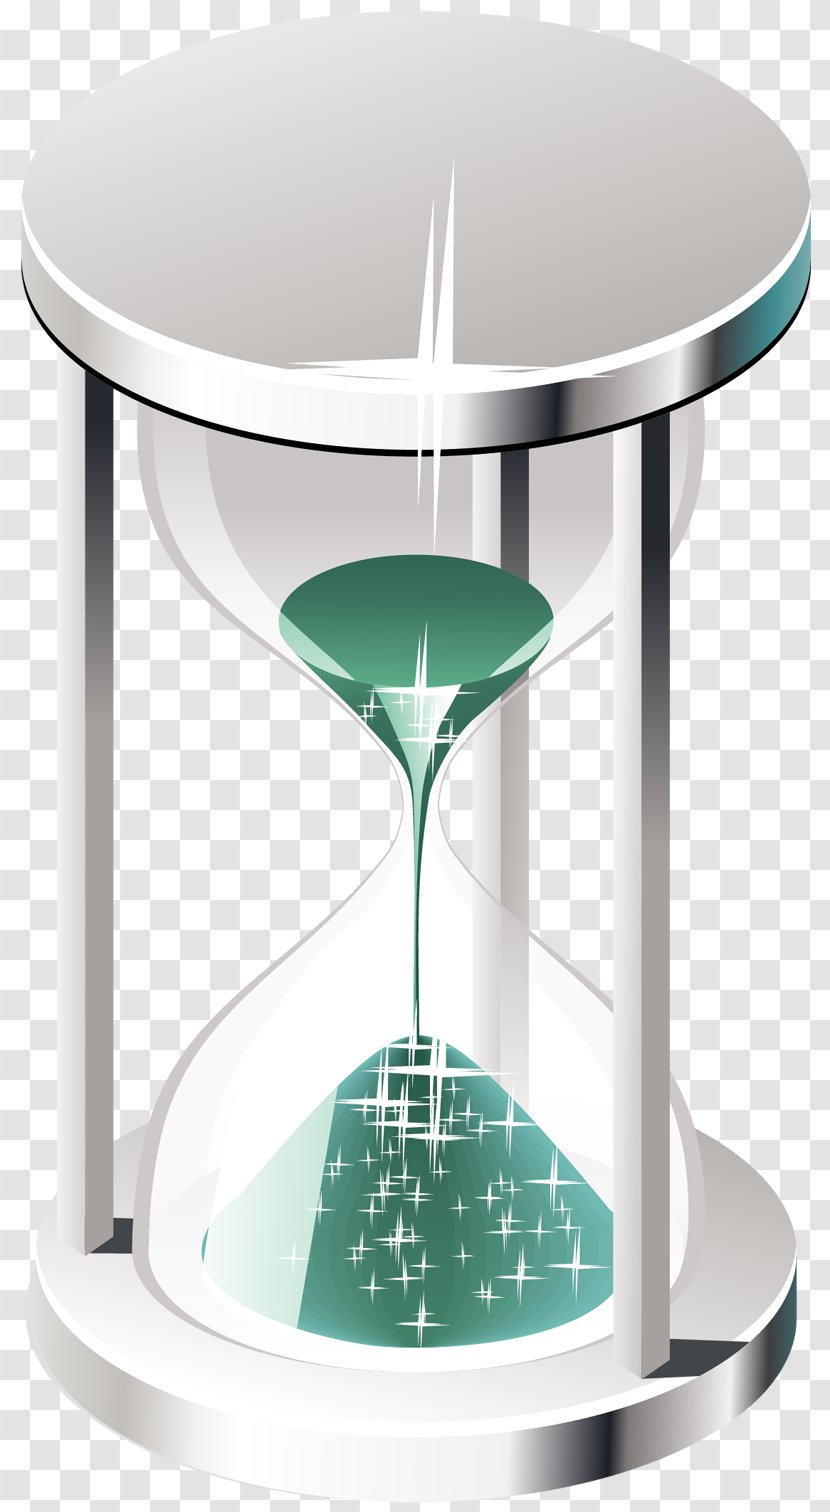 Hourglass Icon - Business - Time Funnel Transparent PNG